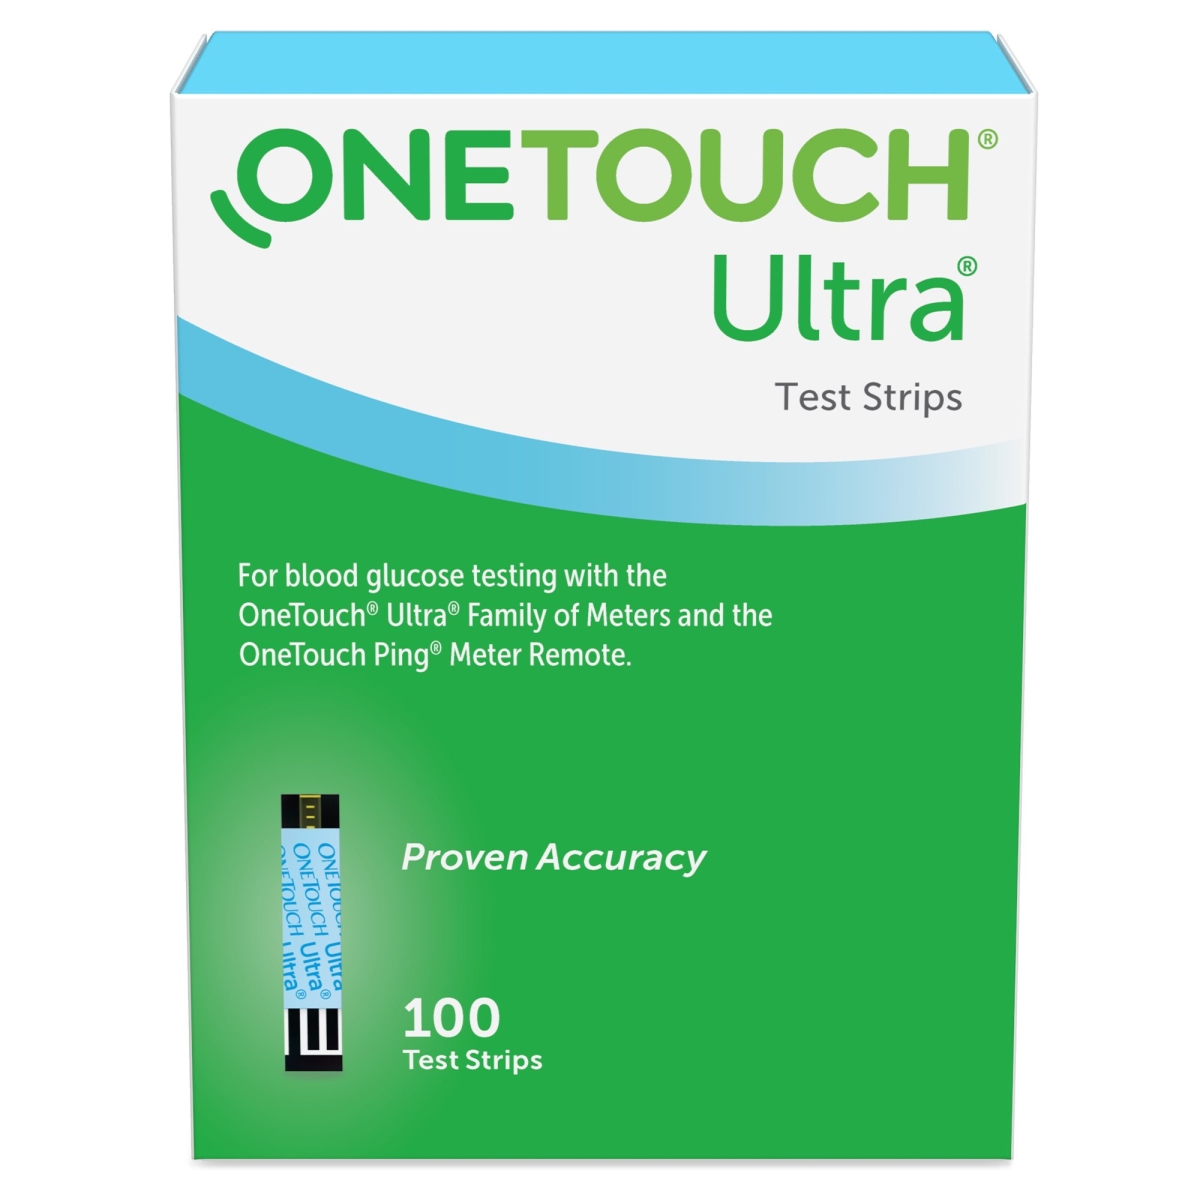 850711-CS OneTouch Ultra Blood Glucose Test Strip for Diagnostic, Blue - Pack of 2400 - 100 per Box -  Lifescan, 850711_CS